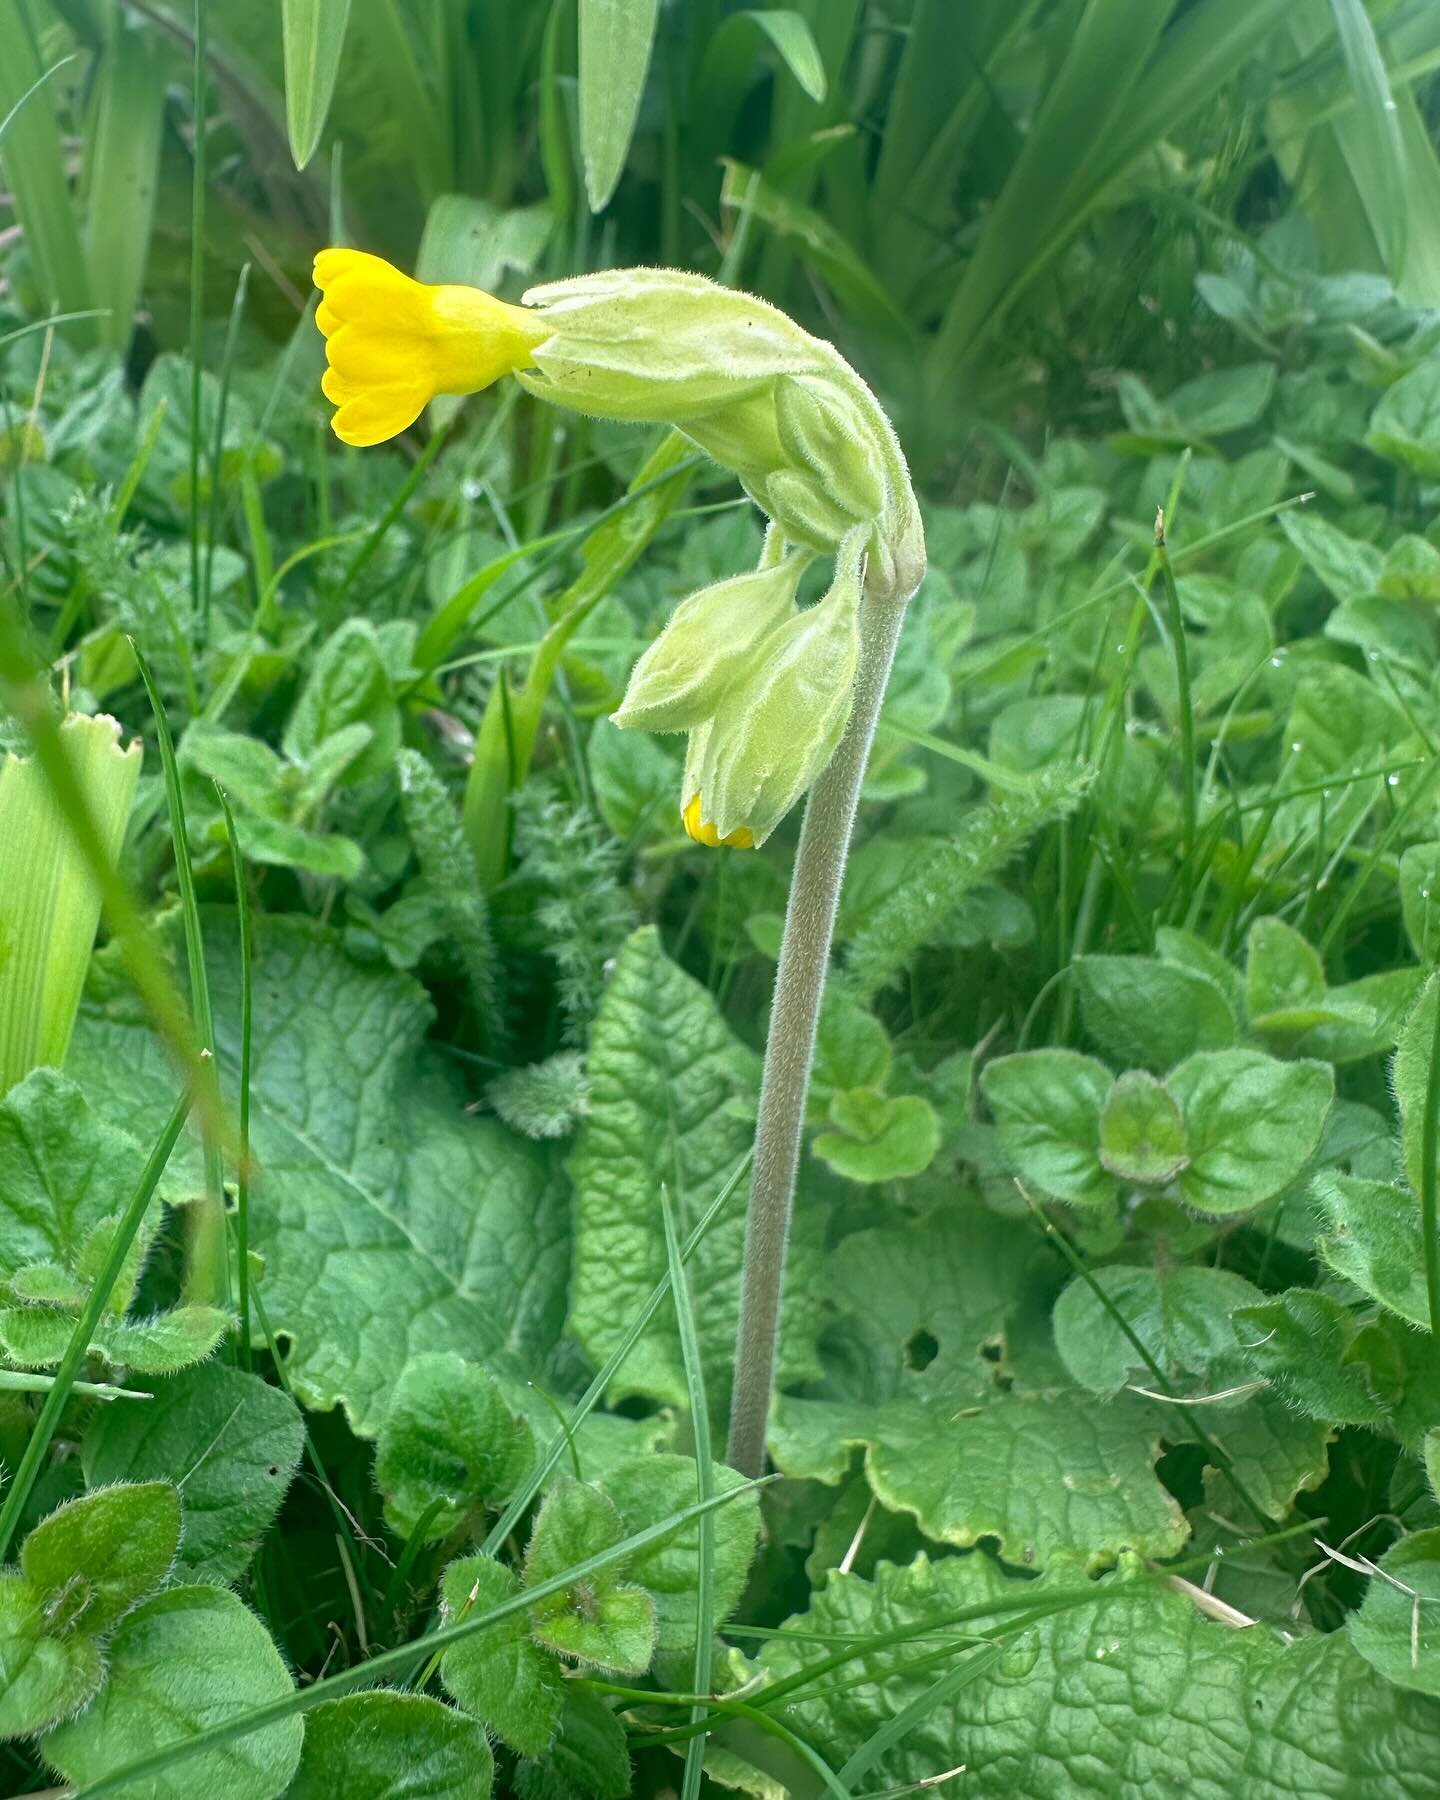 The first Cowslips are appearing at Chalkhill.
And my March Newsletter is out! If you don&rsquo;t already receive it sign up to my mailing list via my bio above to subscribe and also receive a free copy of &ldquo;Five Easy Ways to Make your Garden Wi